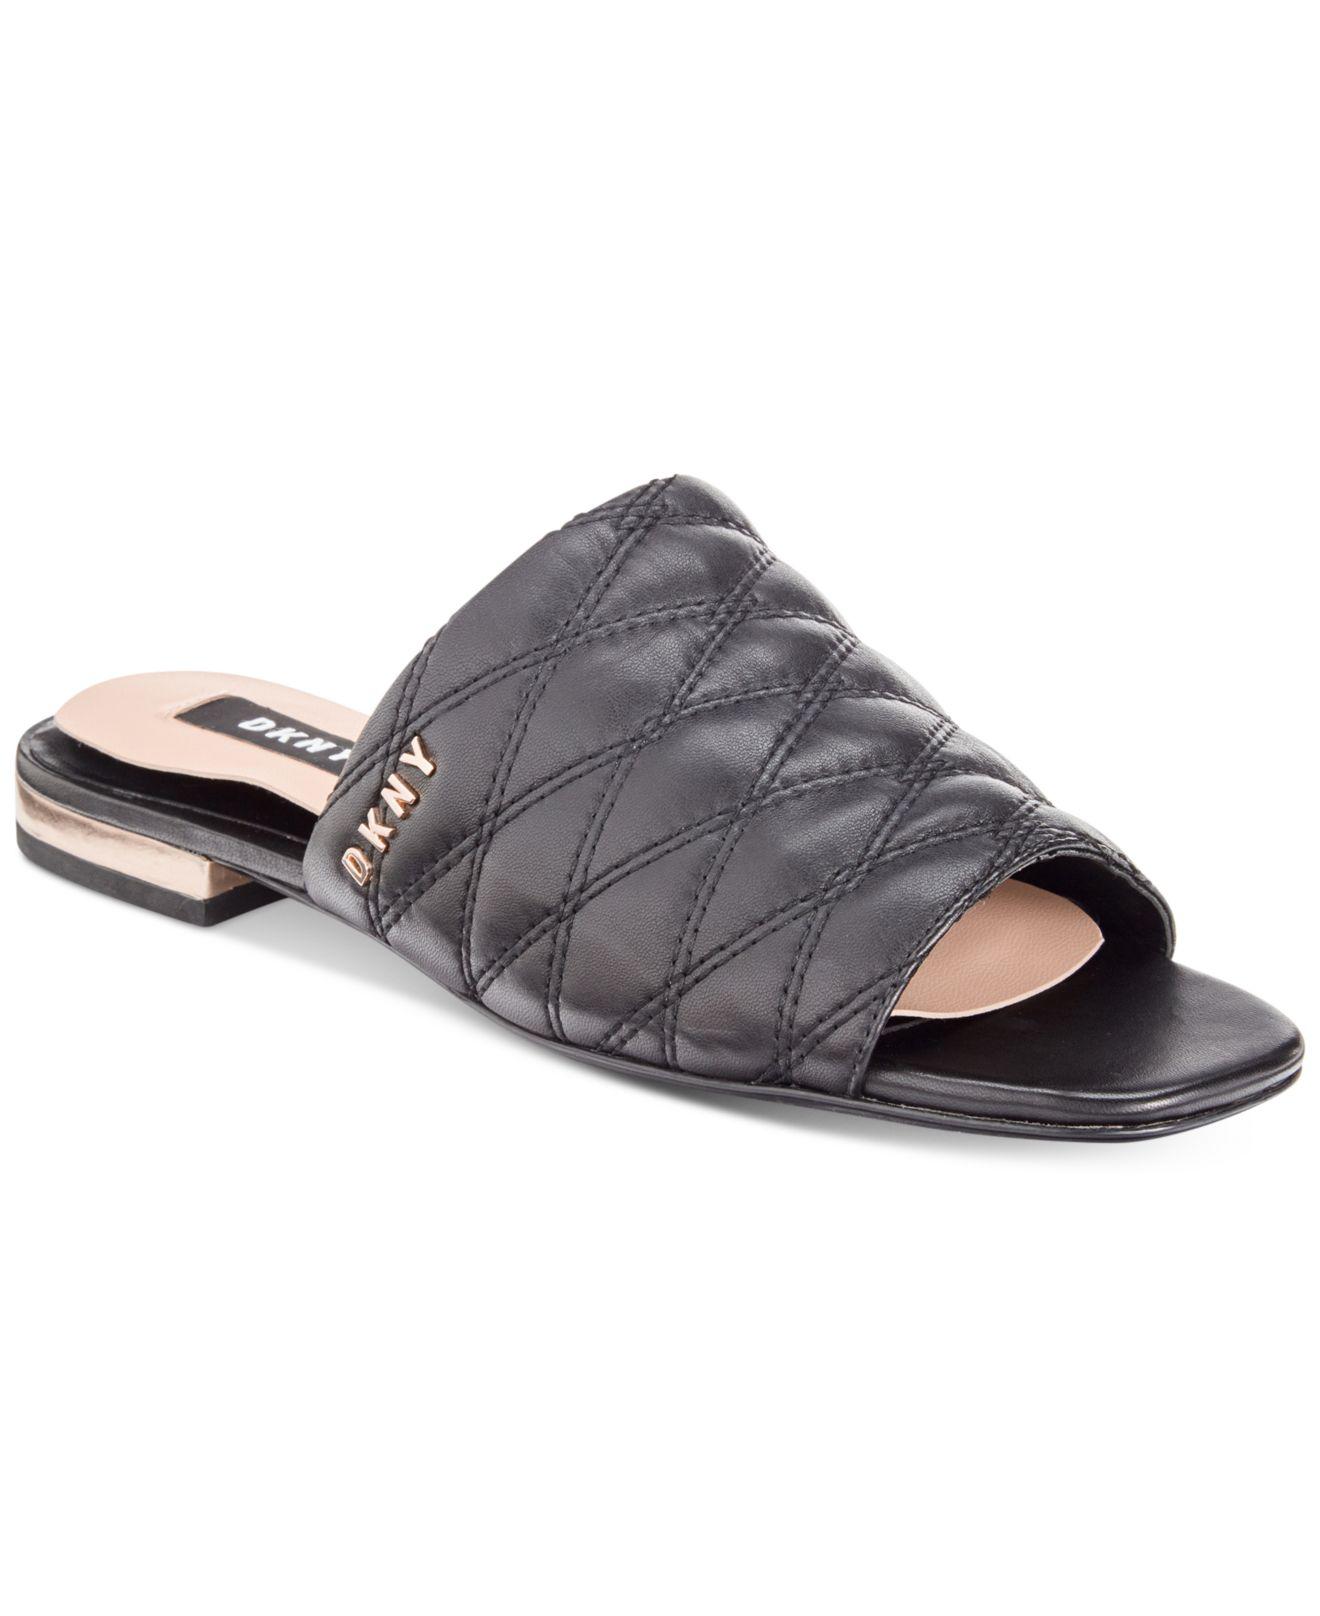 DKNY Leather Roy Flat Sandals in Black - Lyst